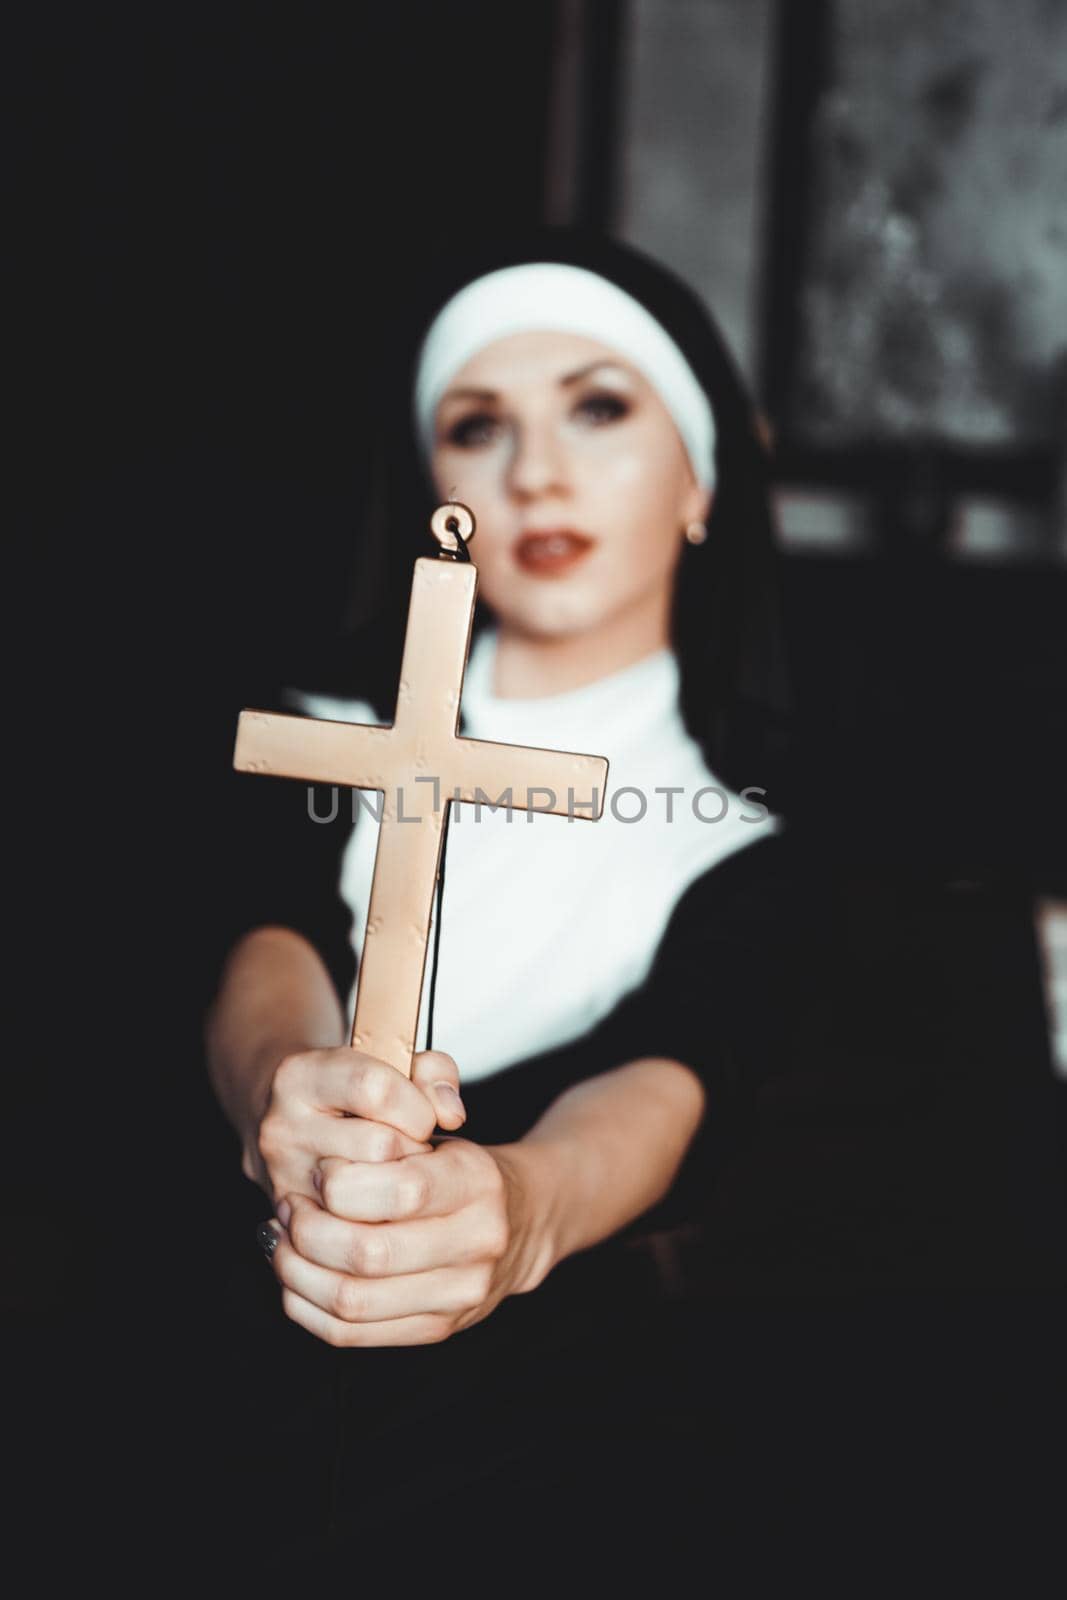 Nun holding a cross. The concept of religion. by natali_brill